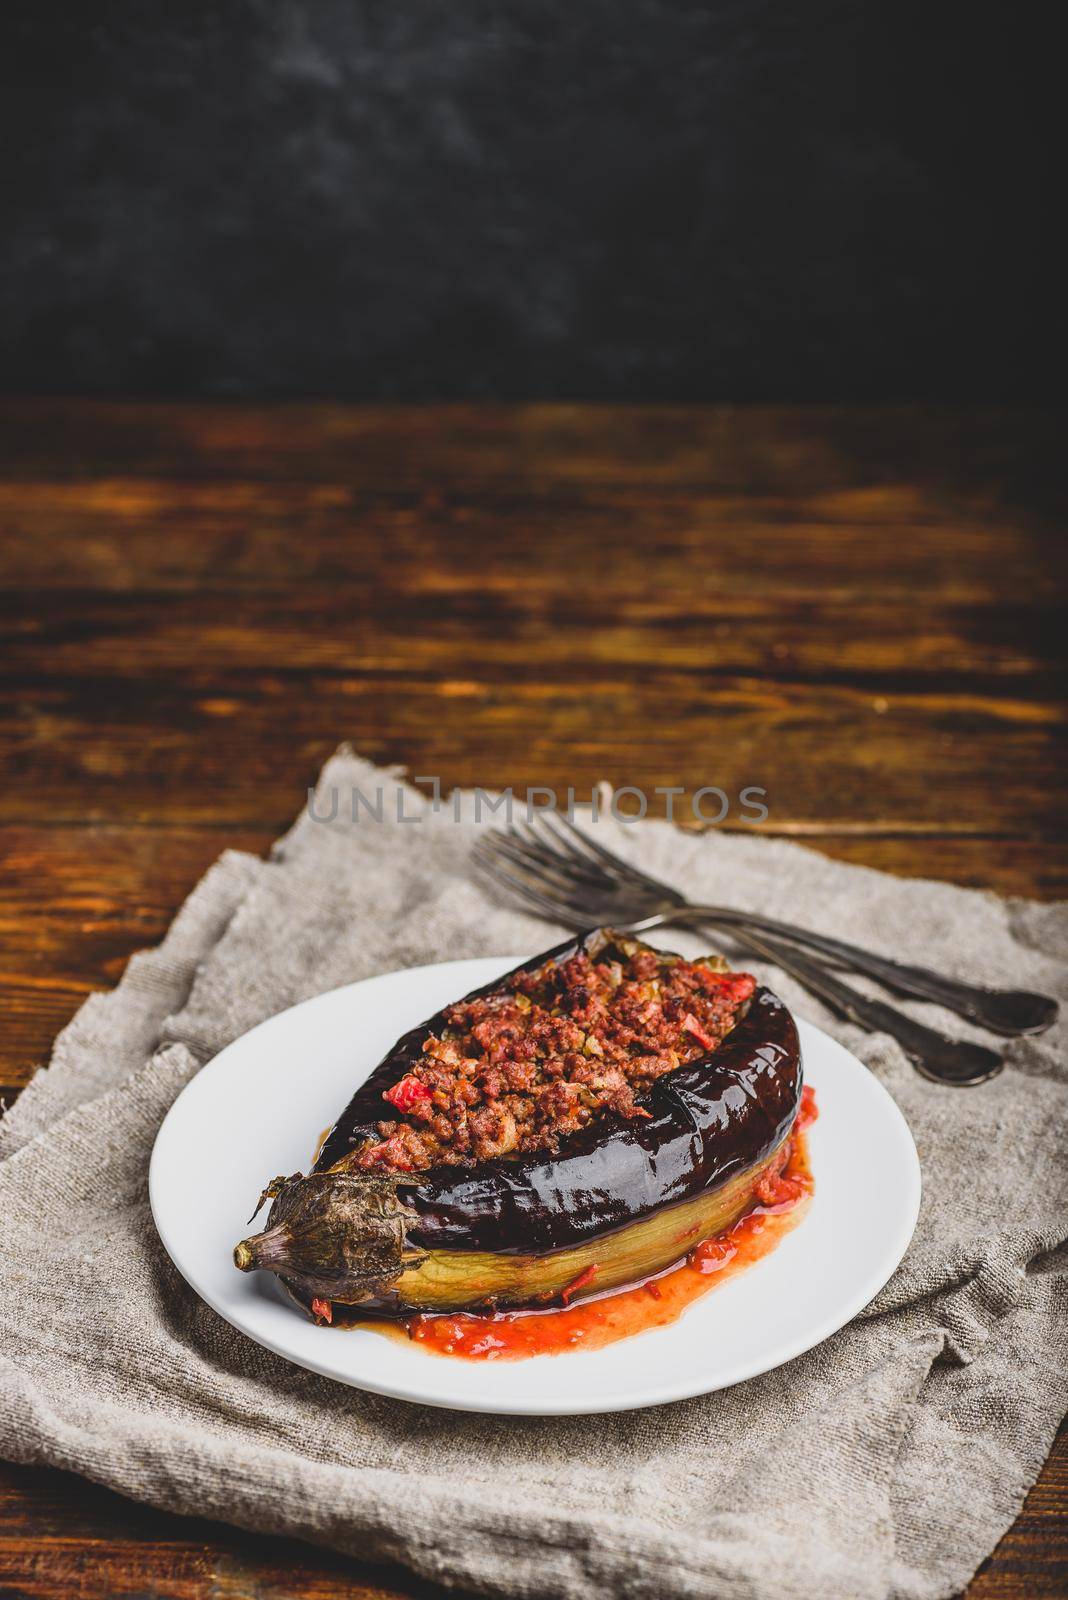 Eggplant stuffed with ground beef and tomatoes by Seva_blsv